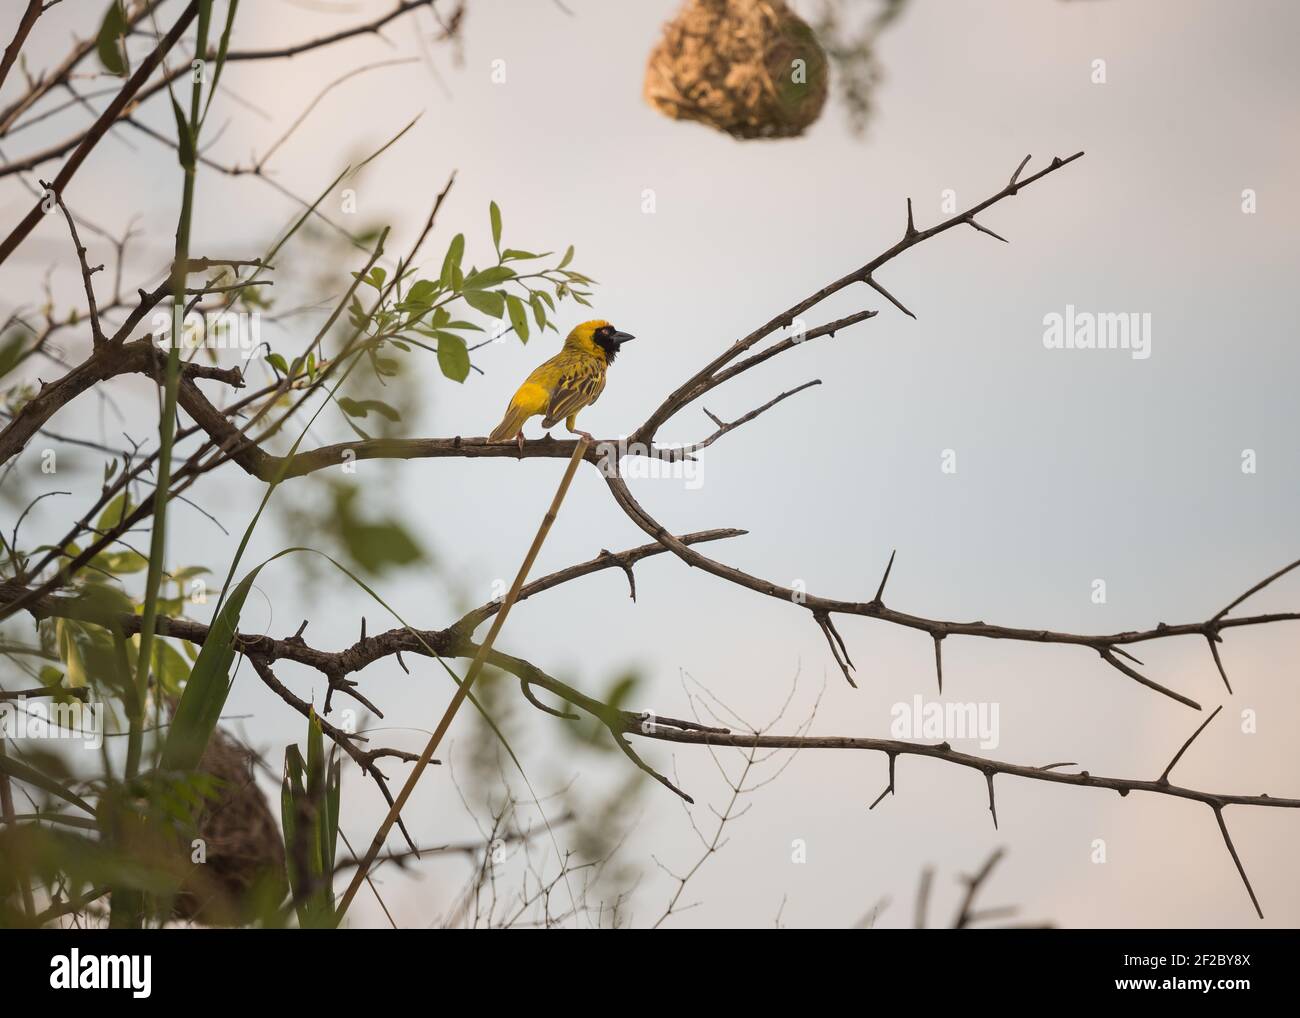 Lesser-masked weaver on a thorny branch with nest in the background. Rietvlei Nature Reserve, South Africa. December 2020 Stock Photo